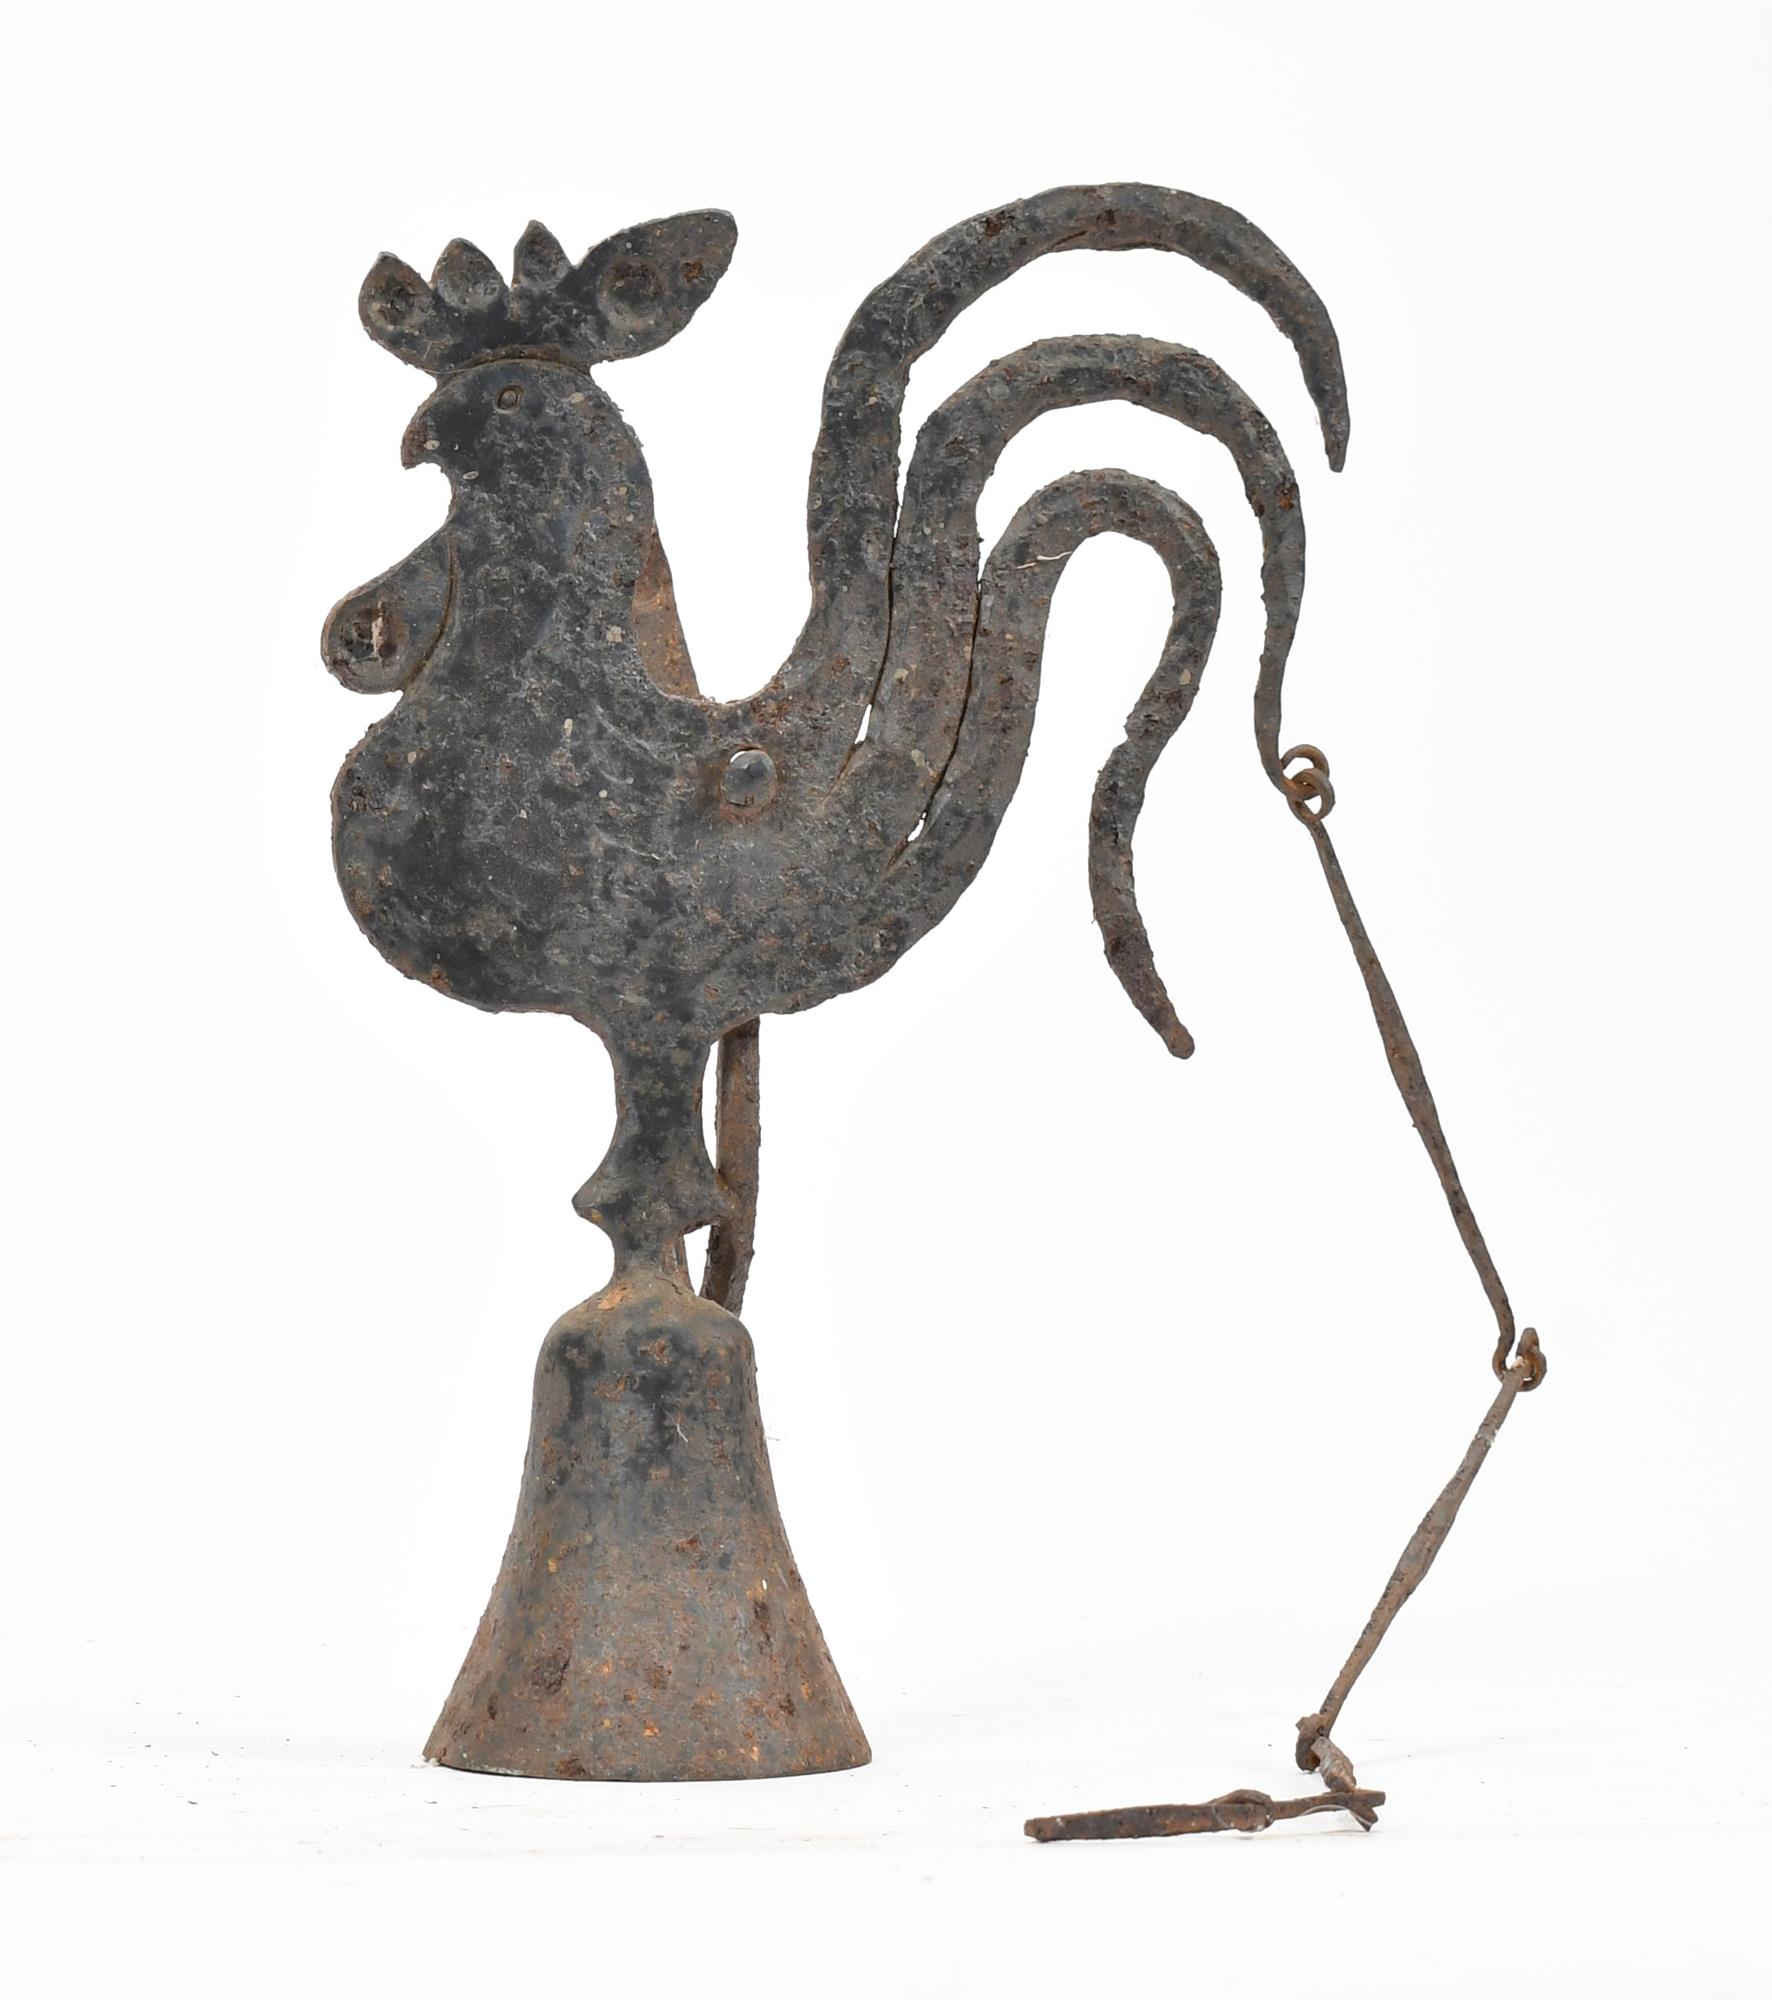 CA 1920 S IRON ROOSTER BELL A 3acc3d